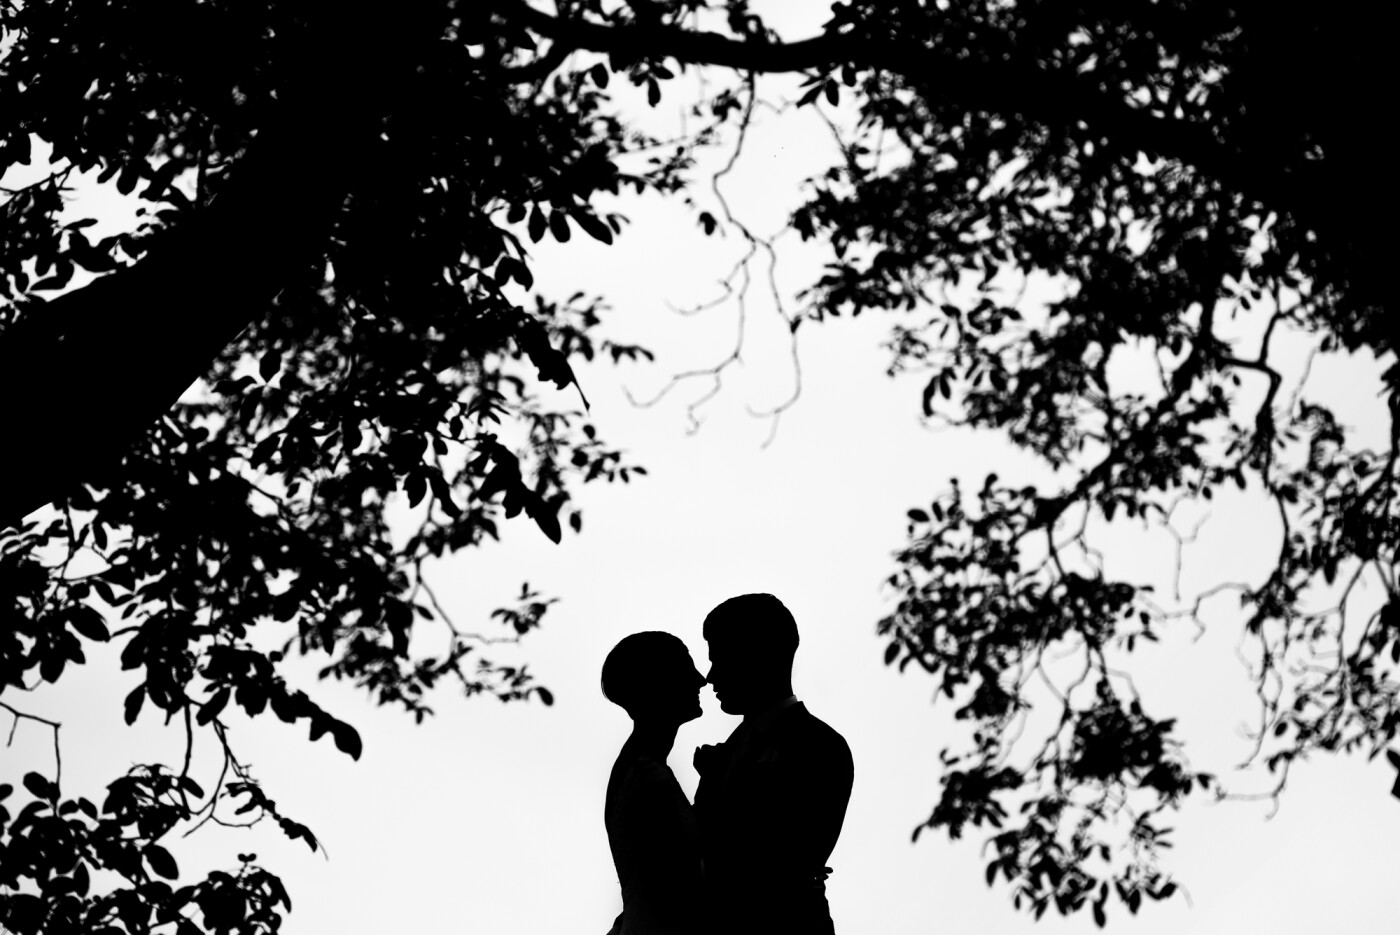 I think silhouettes are great! You can make something astonishing with just a simple surrounding, and ofcourse a couple that's crazy in love :)